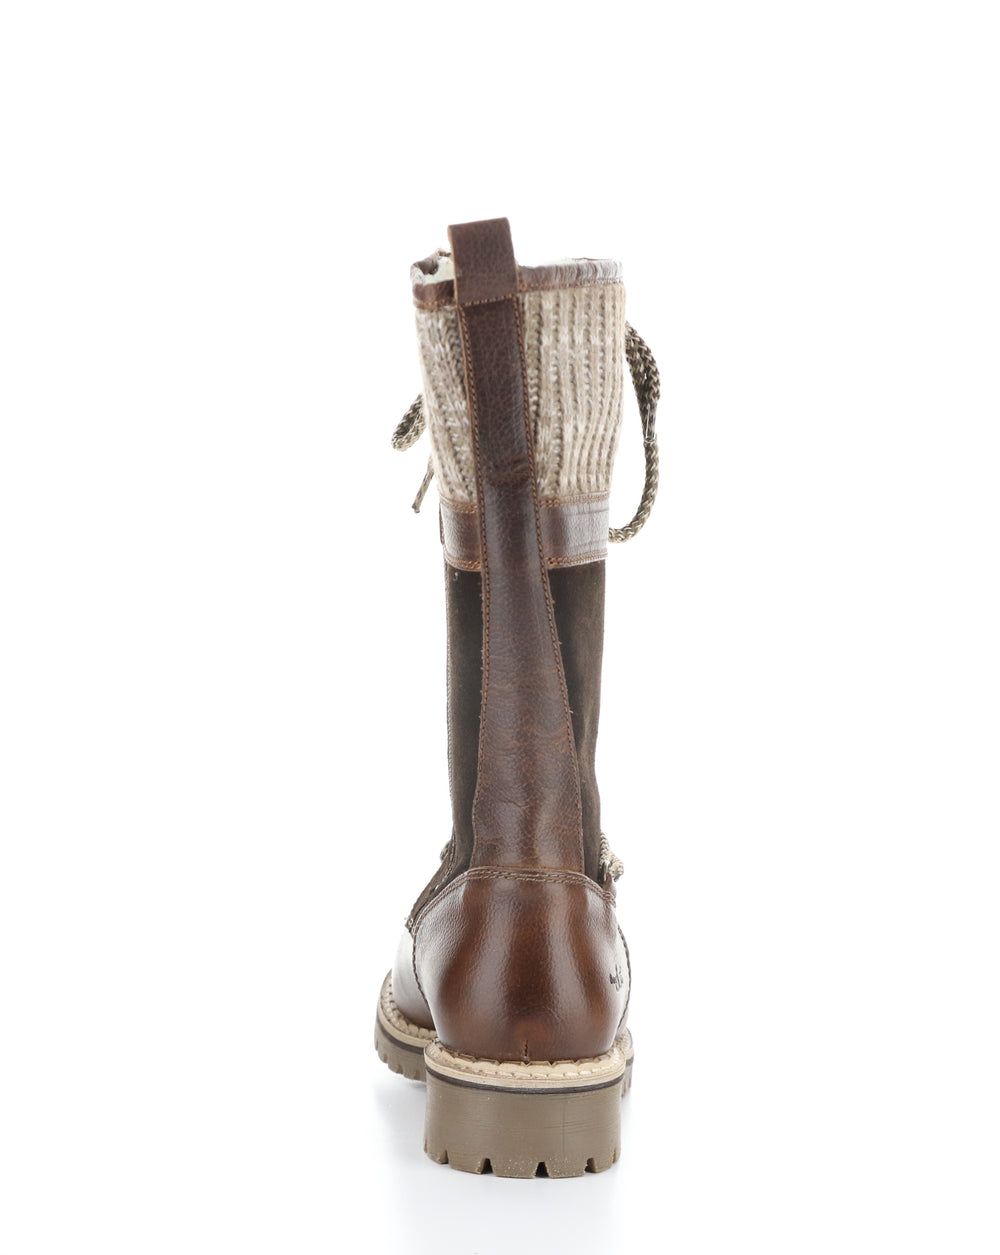 HAVEN BRANDY/COFFEE/TAUPE Round Toe Boots